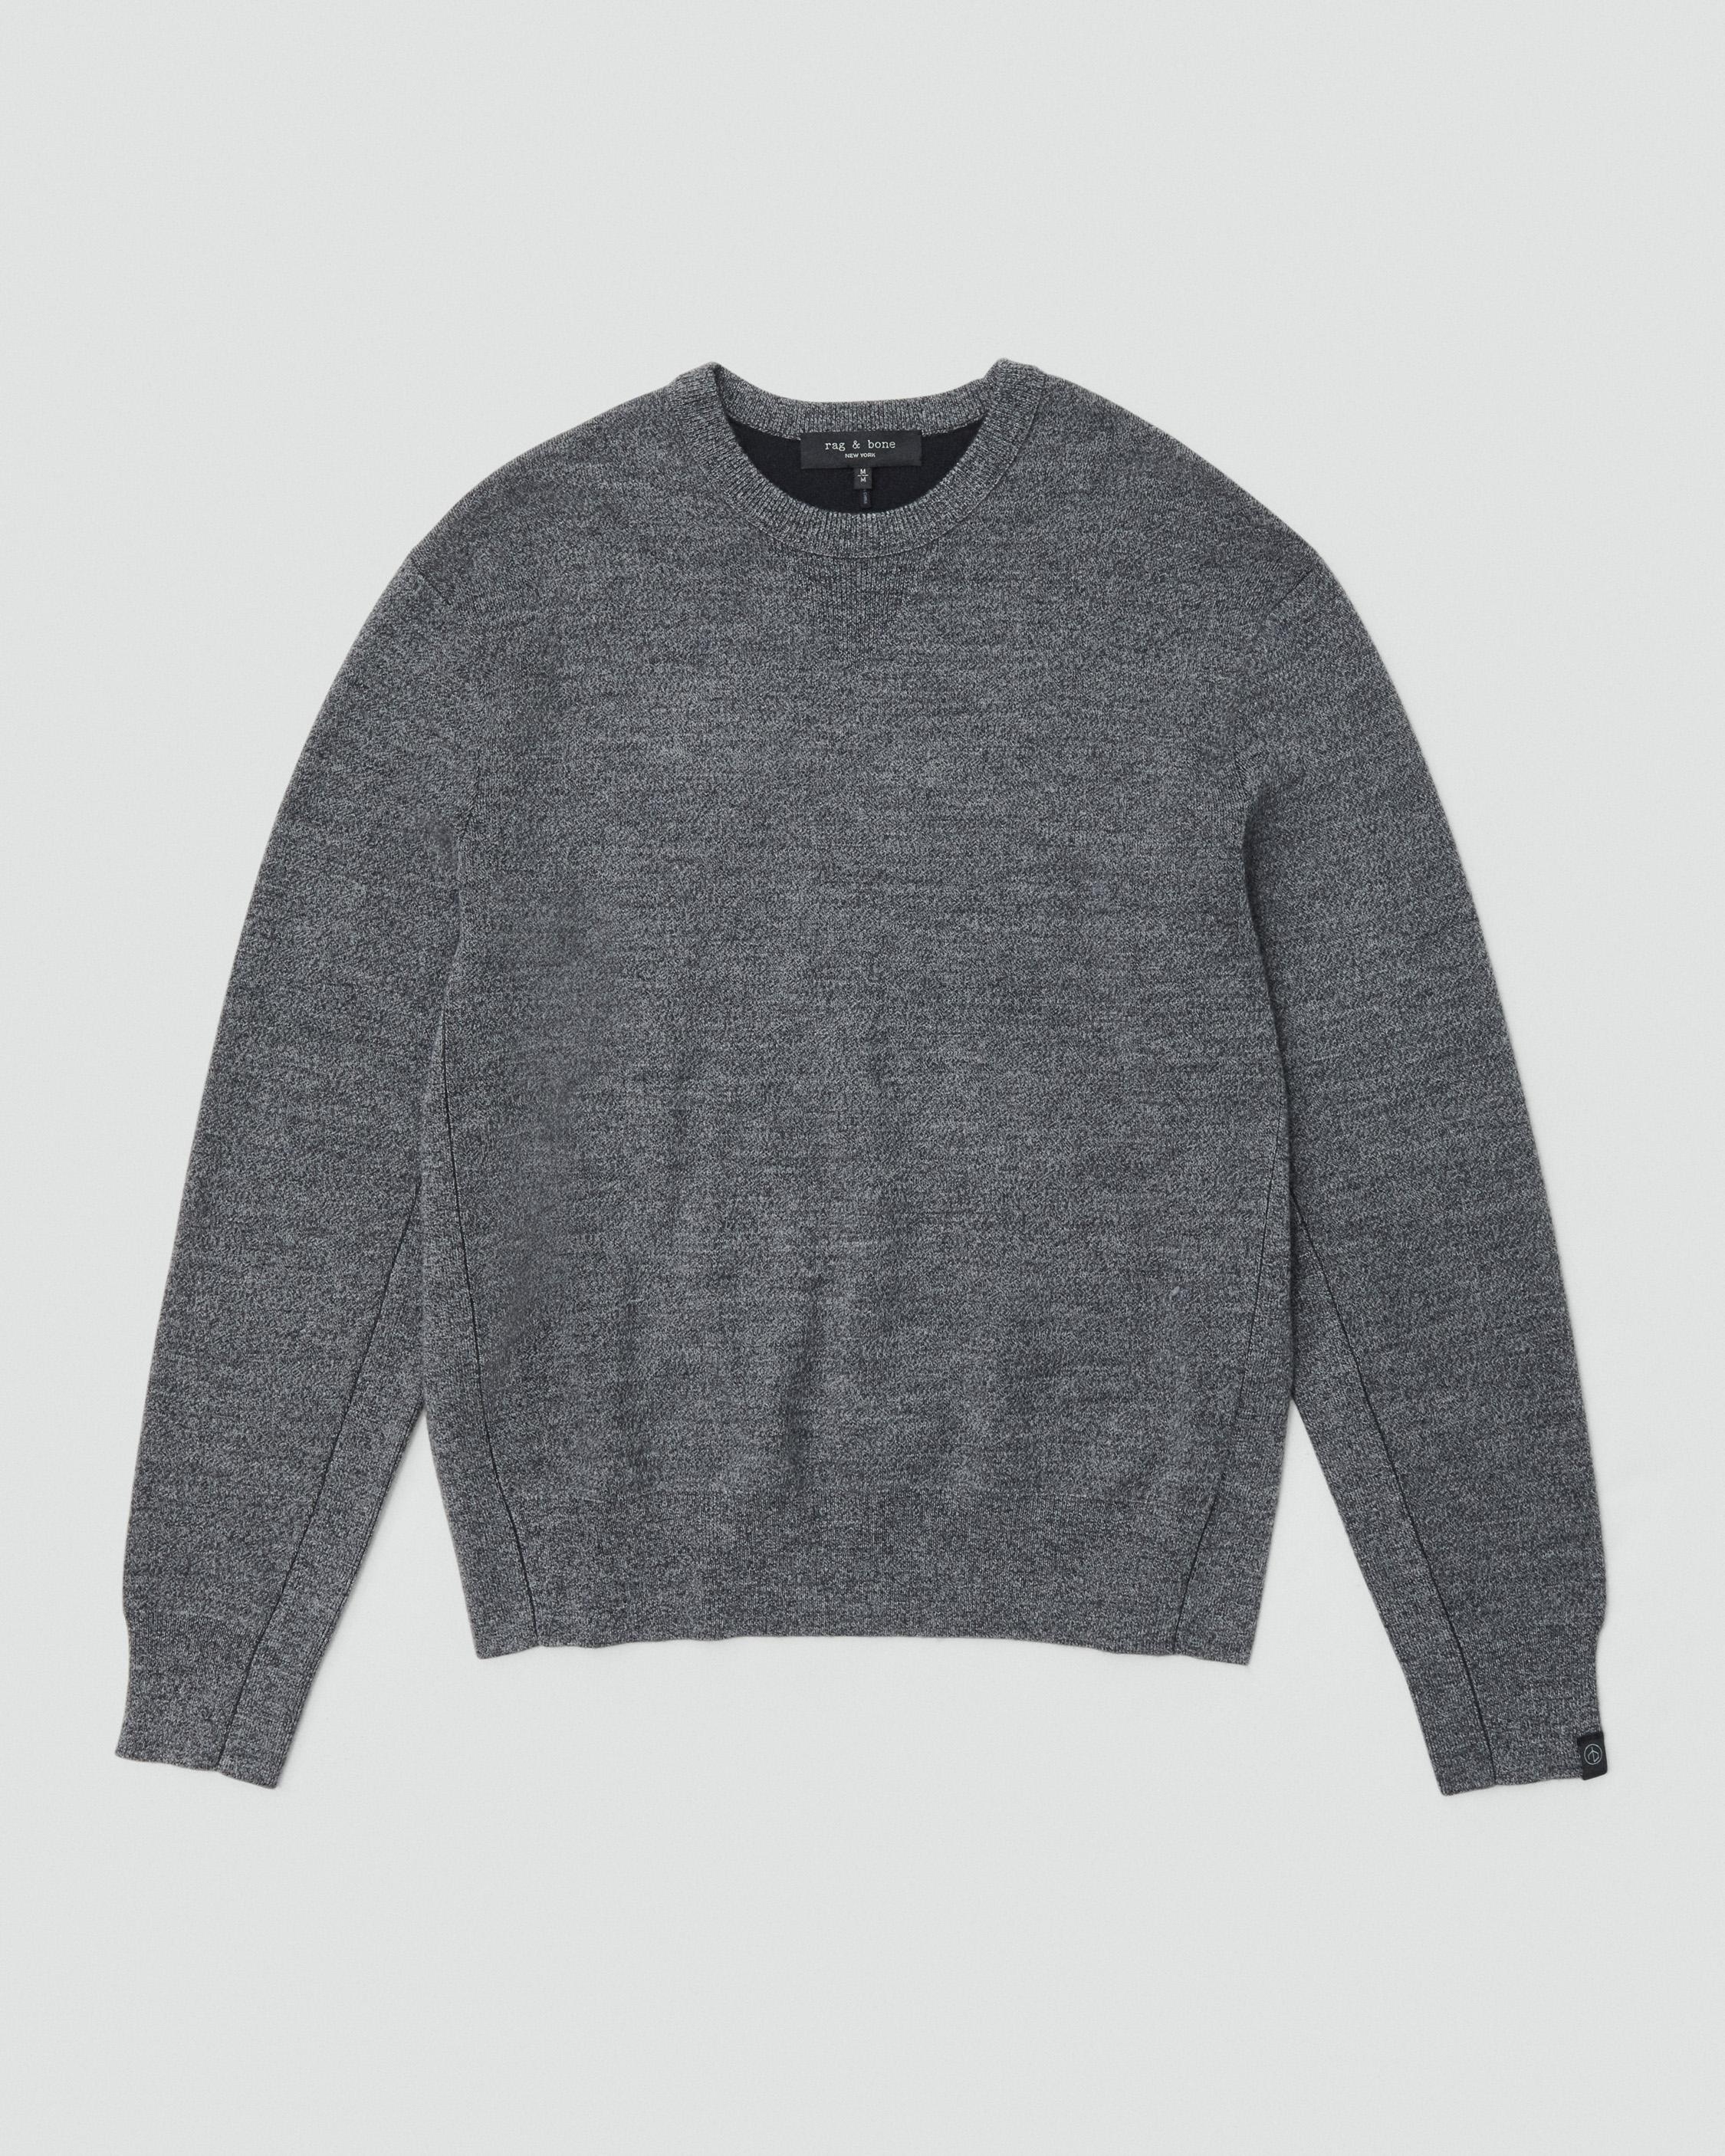 York Wool Crew
Relaxed Fit - 1